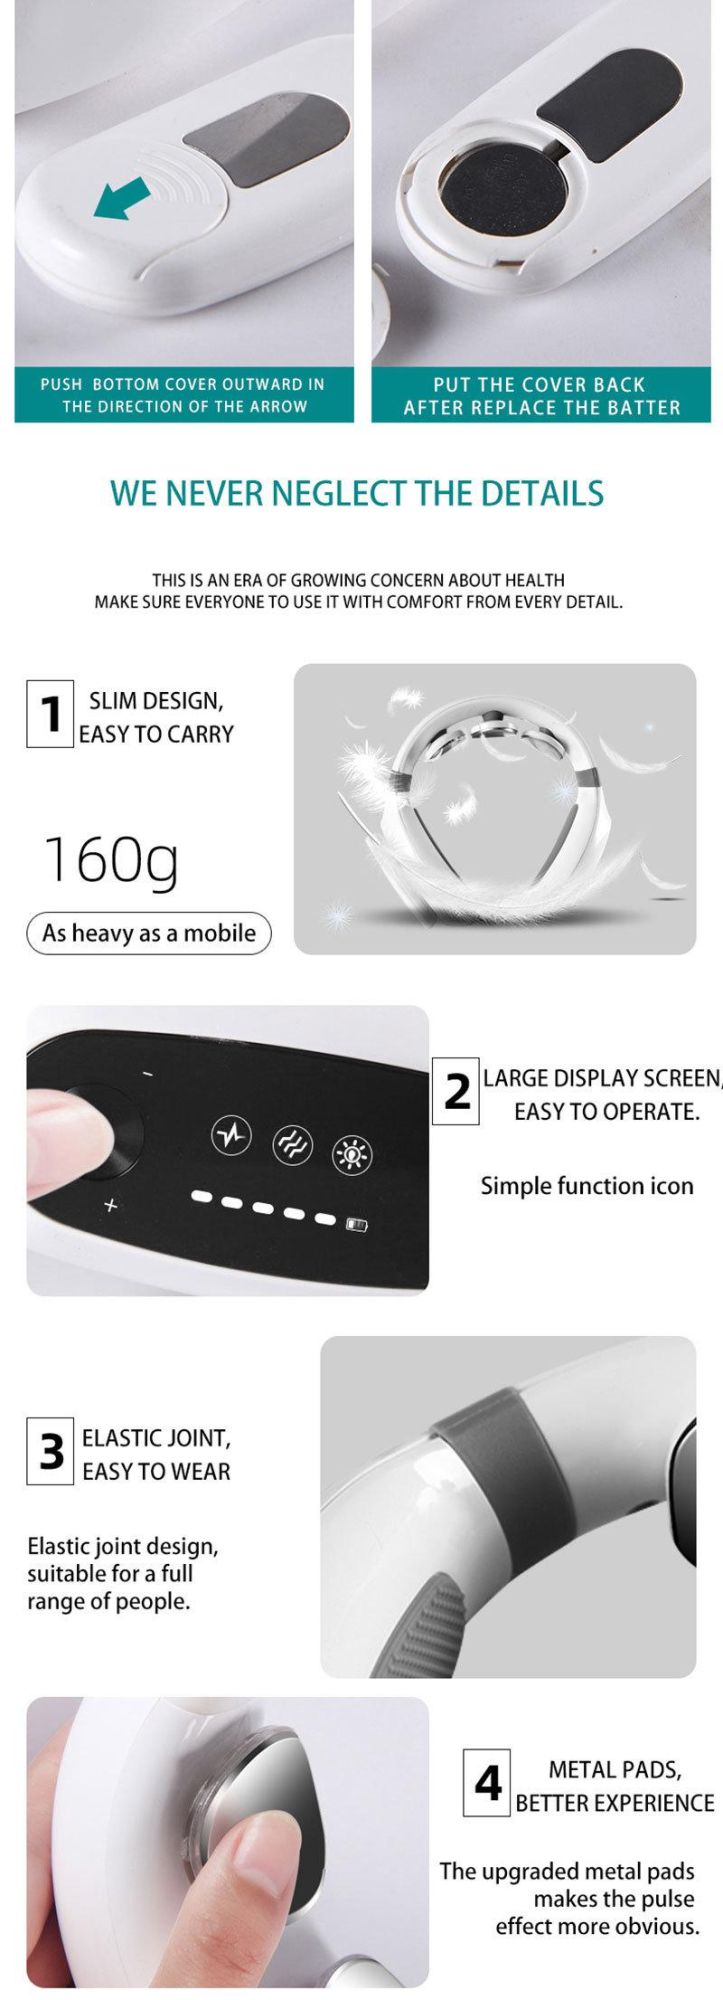 Hezheng Multi-Function Back Neck Intelligent Pulse Electric Meridian Physiotherapy Mini Neck Protector Neck Massager